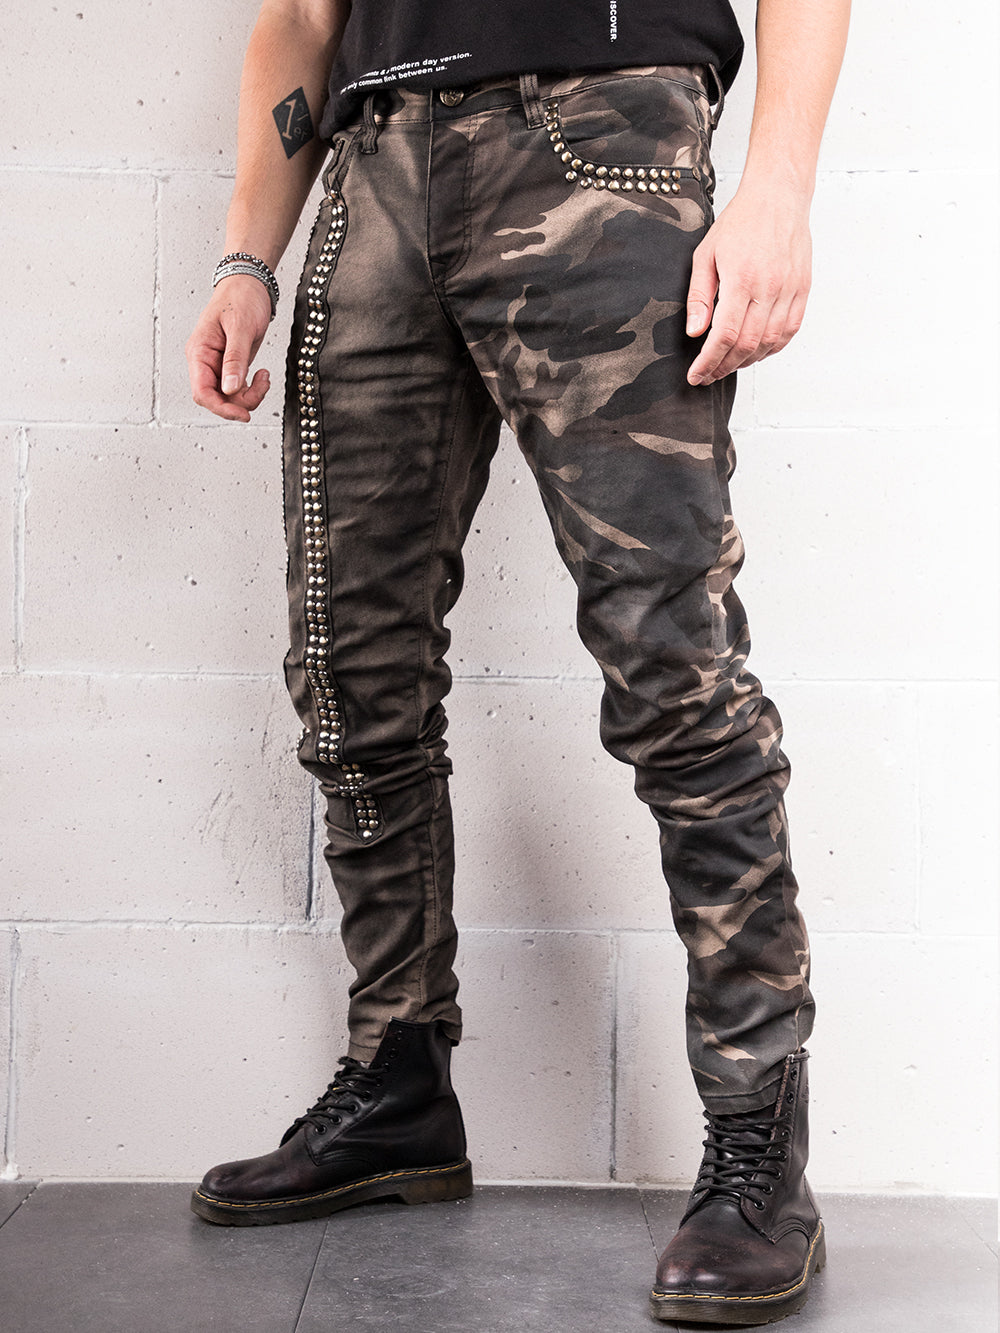 A man wearing SNIPER hand-crafted black camouflage pants with a skinny fit.